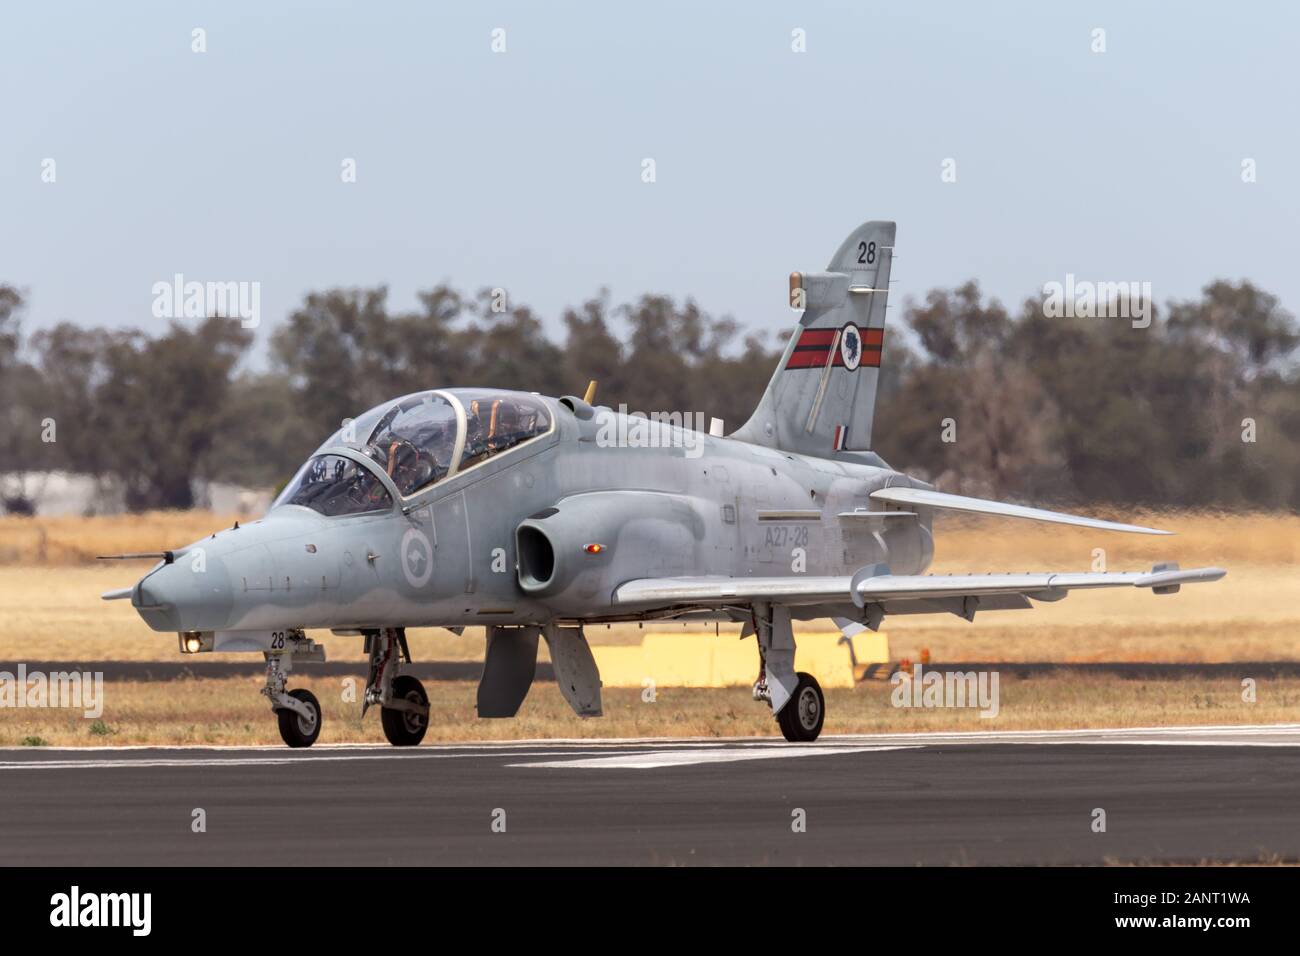 Royal Australian Air Force (RAAF) BAE Hawk 127 lead in fighter trainer aircraft A27-28 from No. 76 Squadron based at RAAF Base Williamtown. Stock Photo